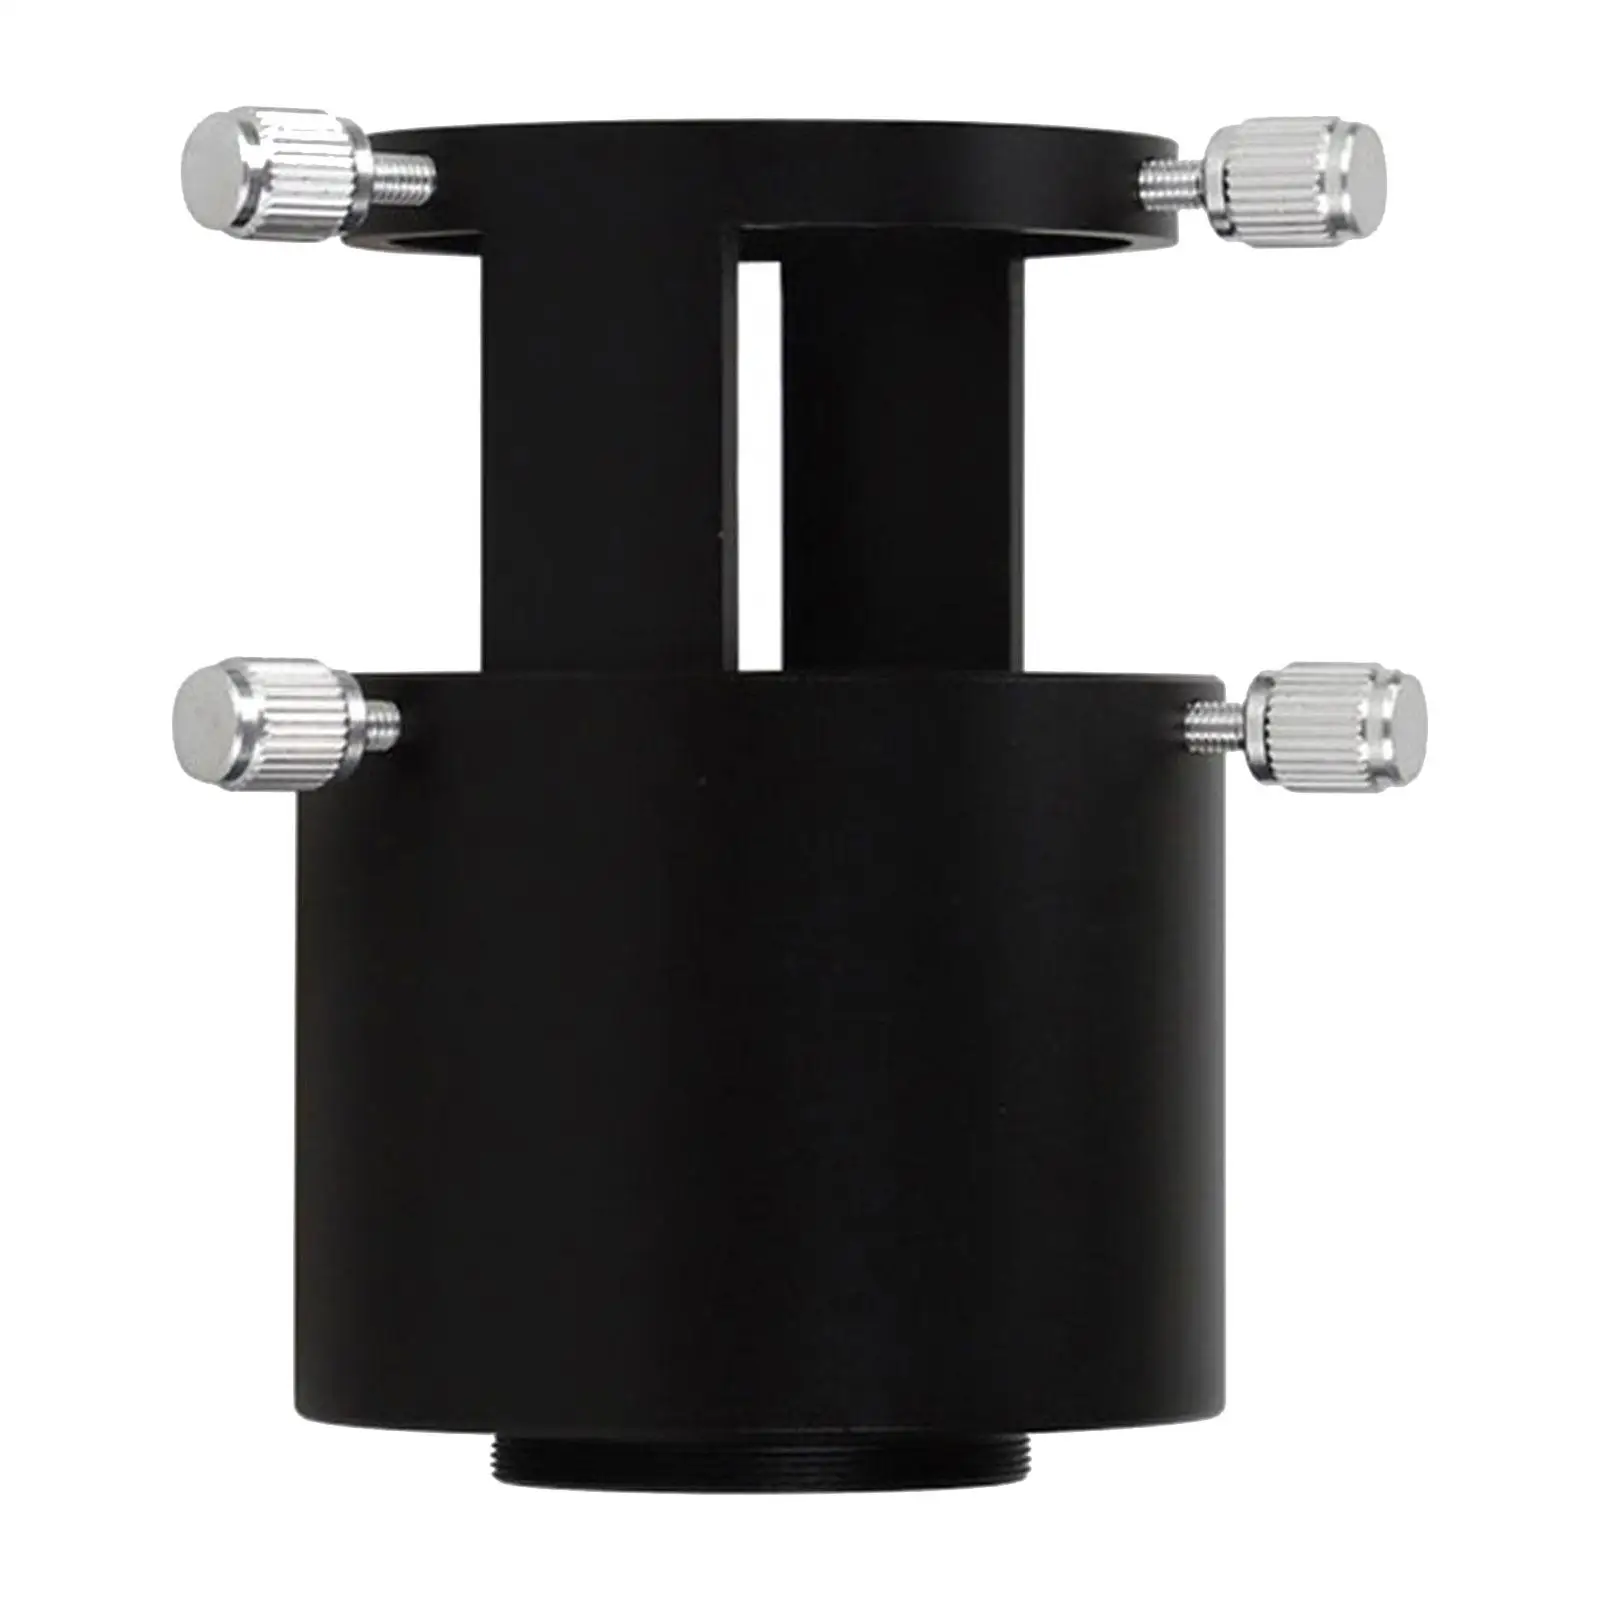 Variable Telescope Camera Adapter for Cameras and Eyepieces Aluminum Alloy